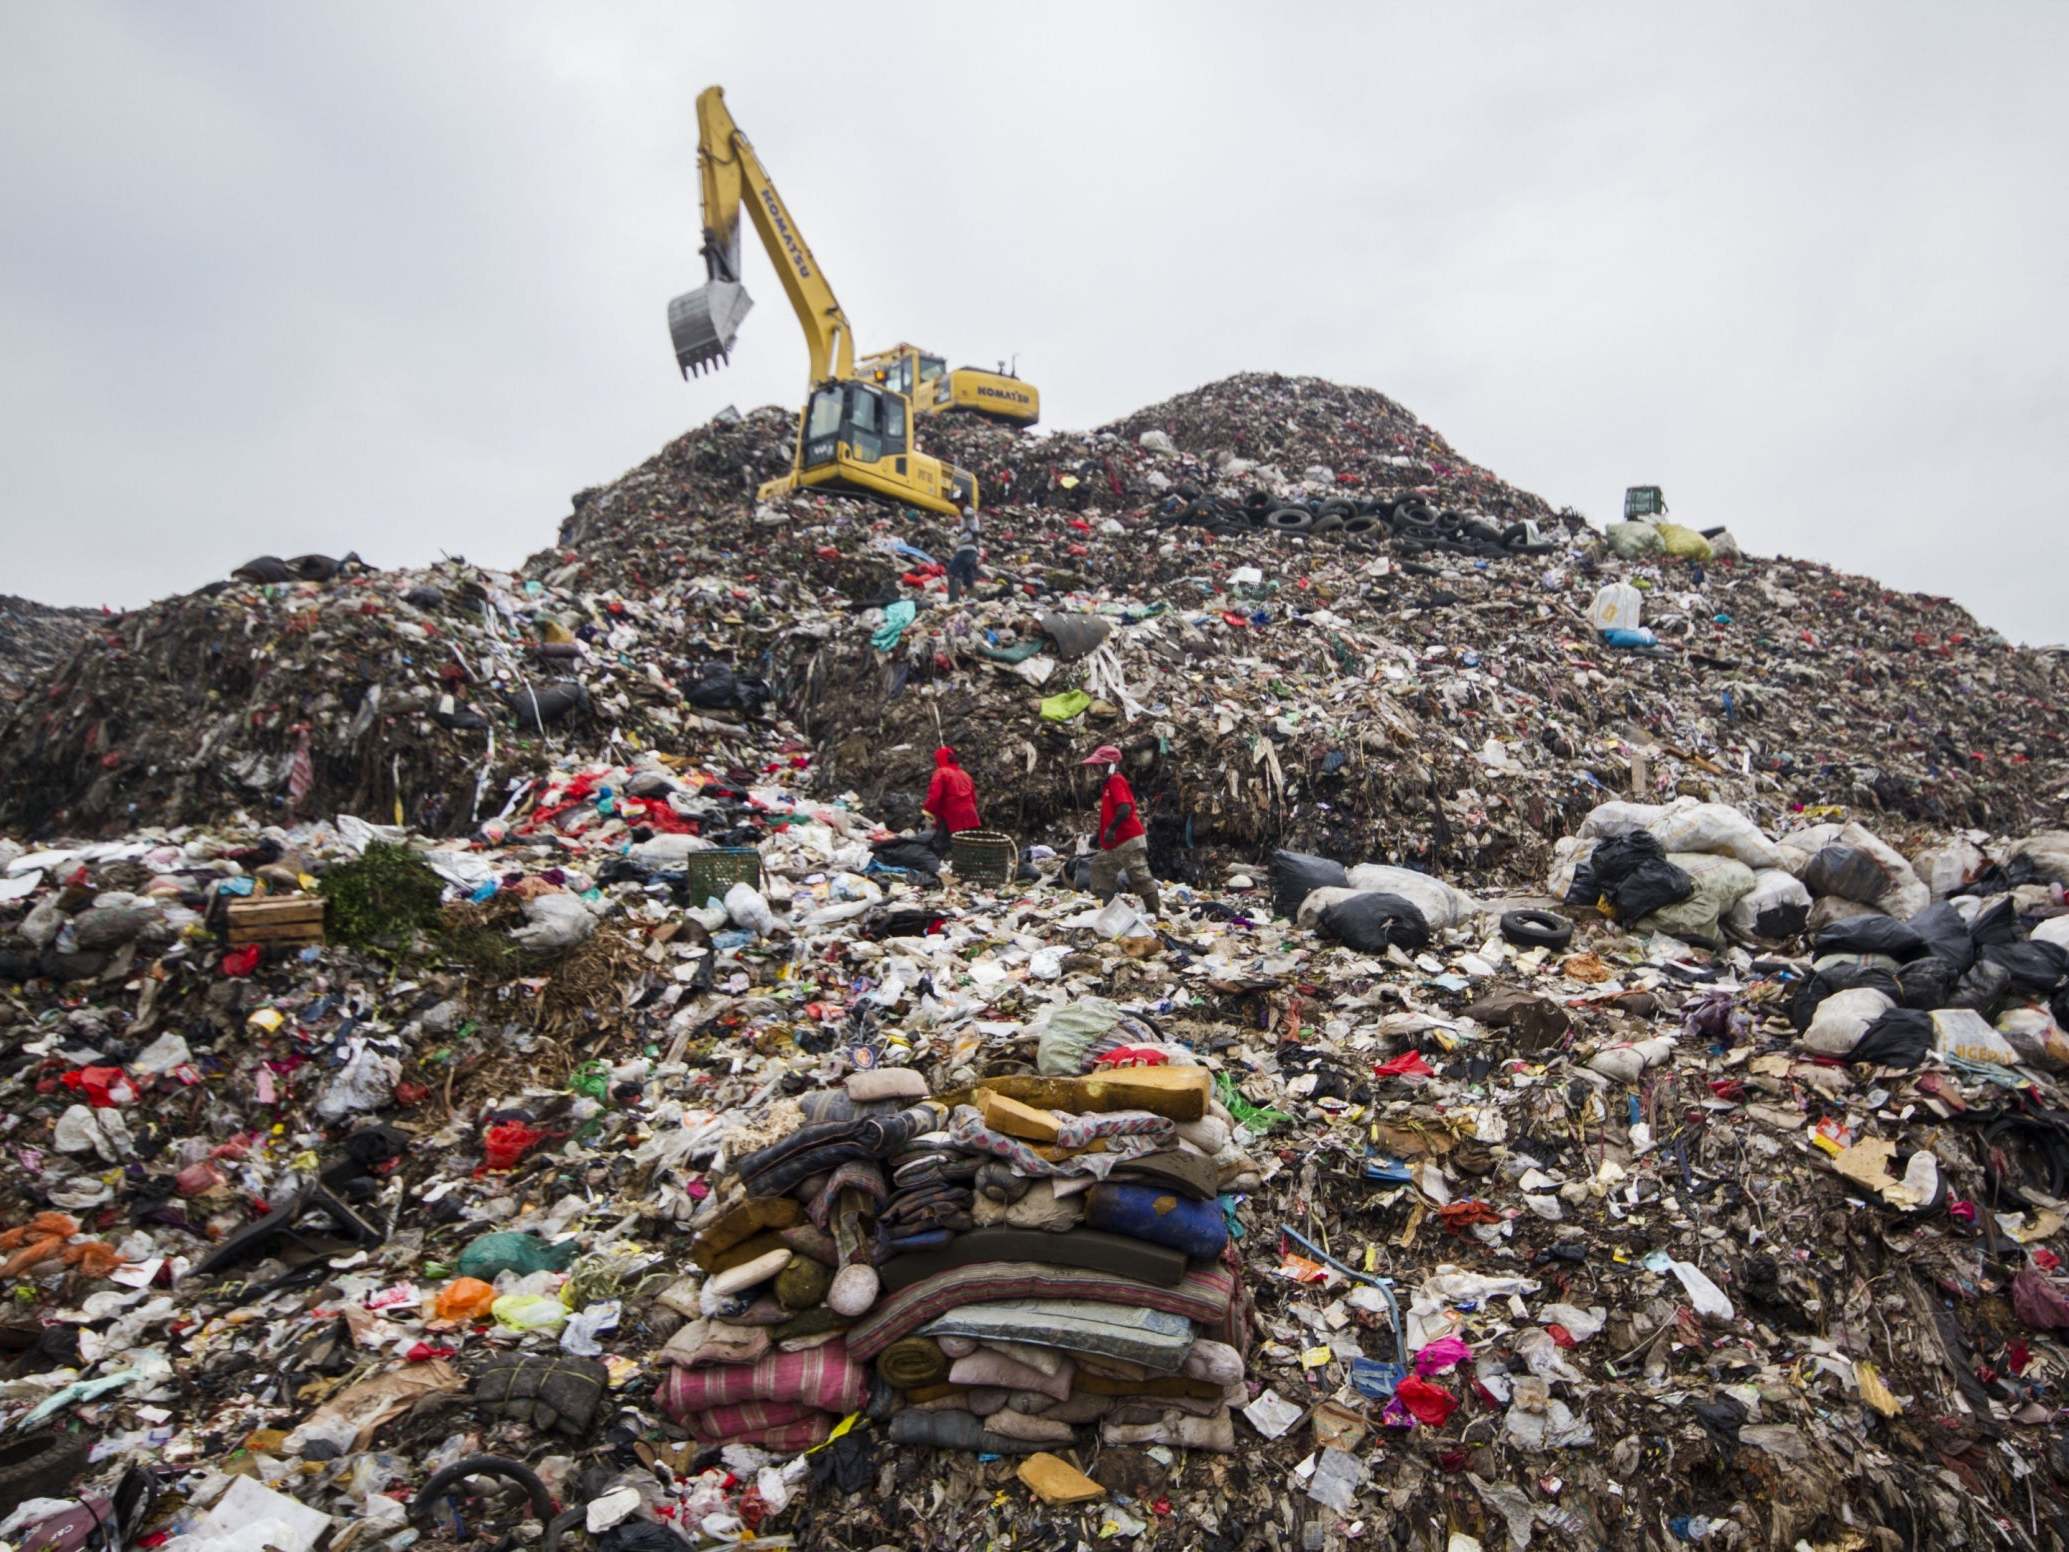 ‘Please reduce your waste’: The landfill mountains grow ever higher in